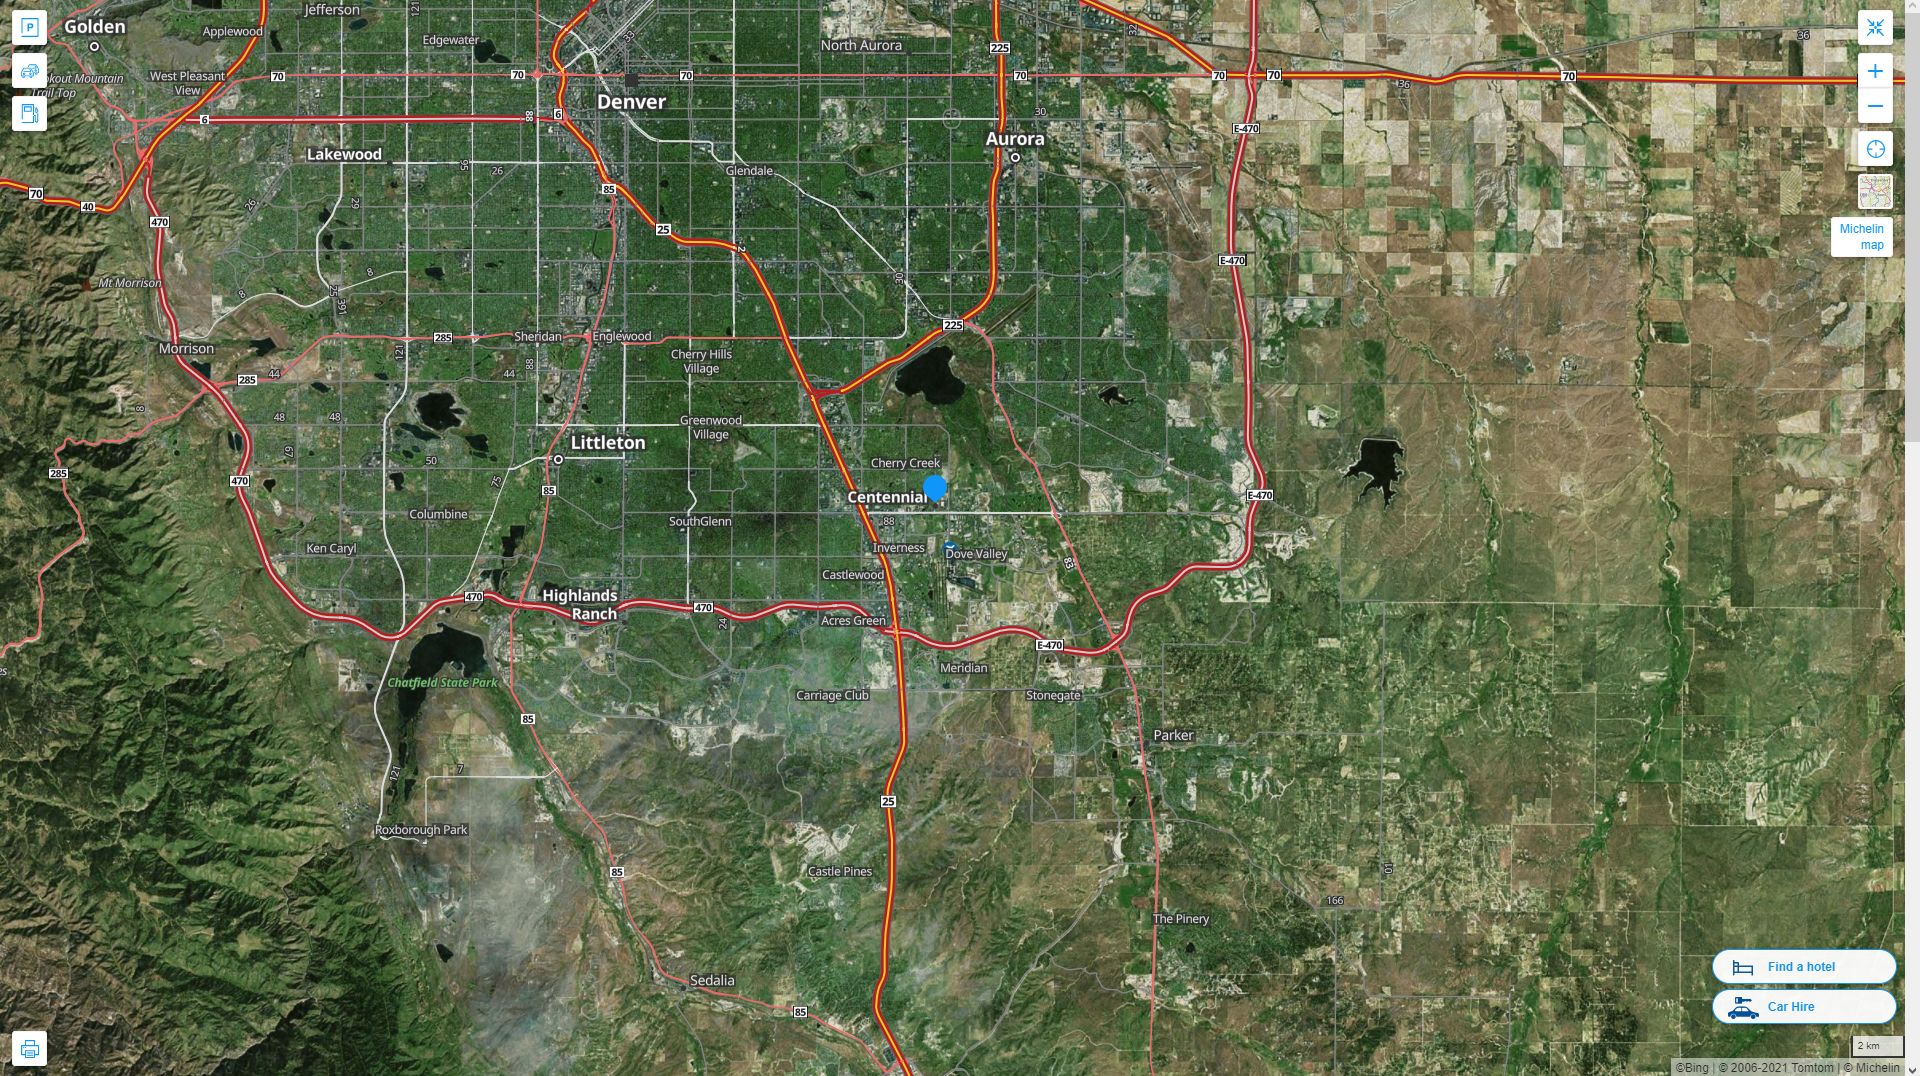 Centennial Colorado Highway and Road Map with Satellite View